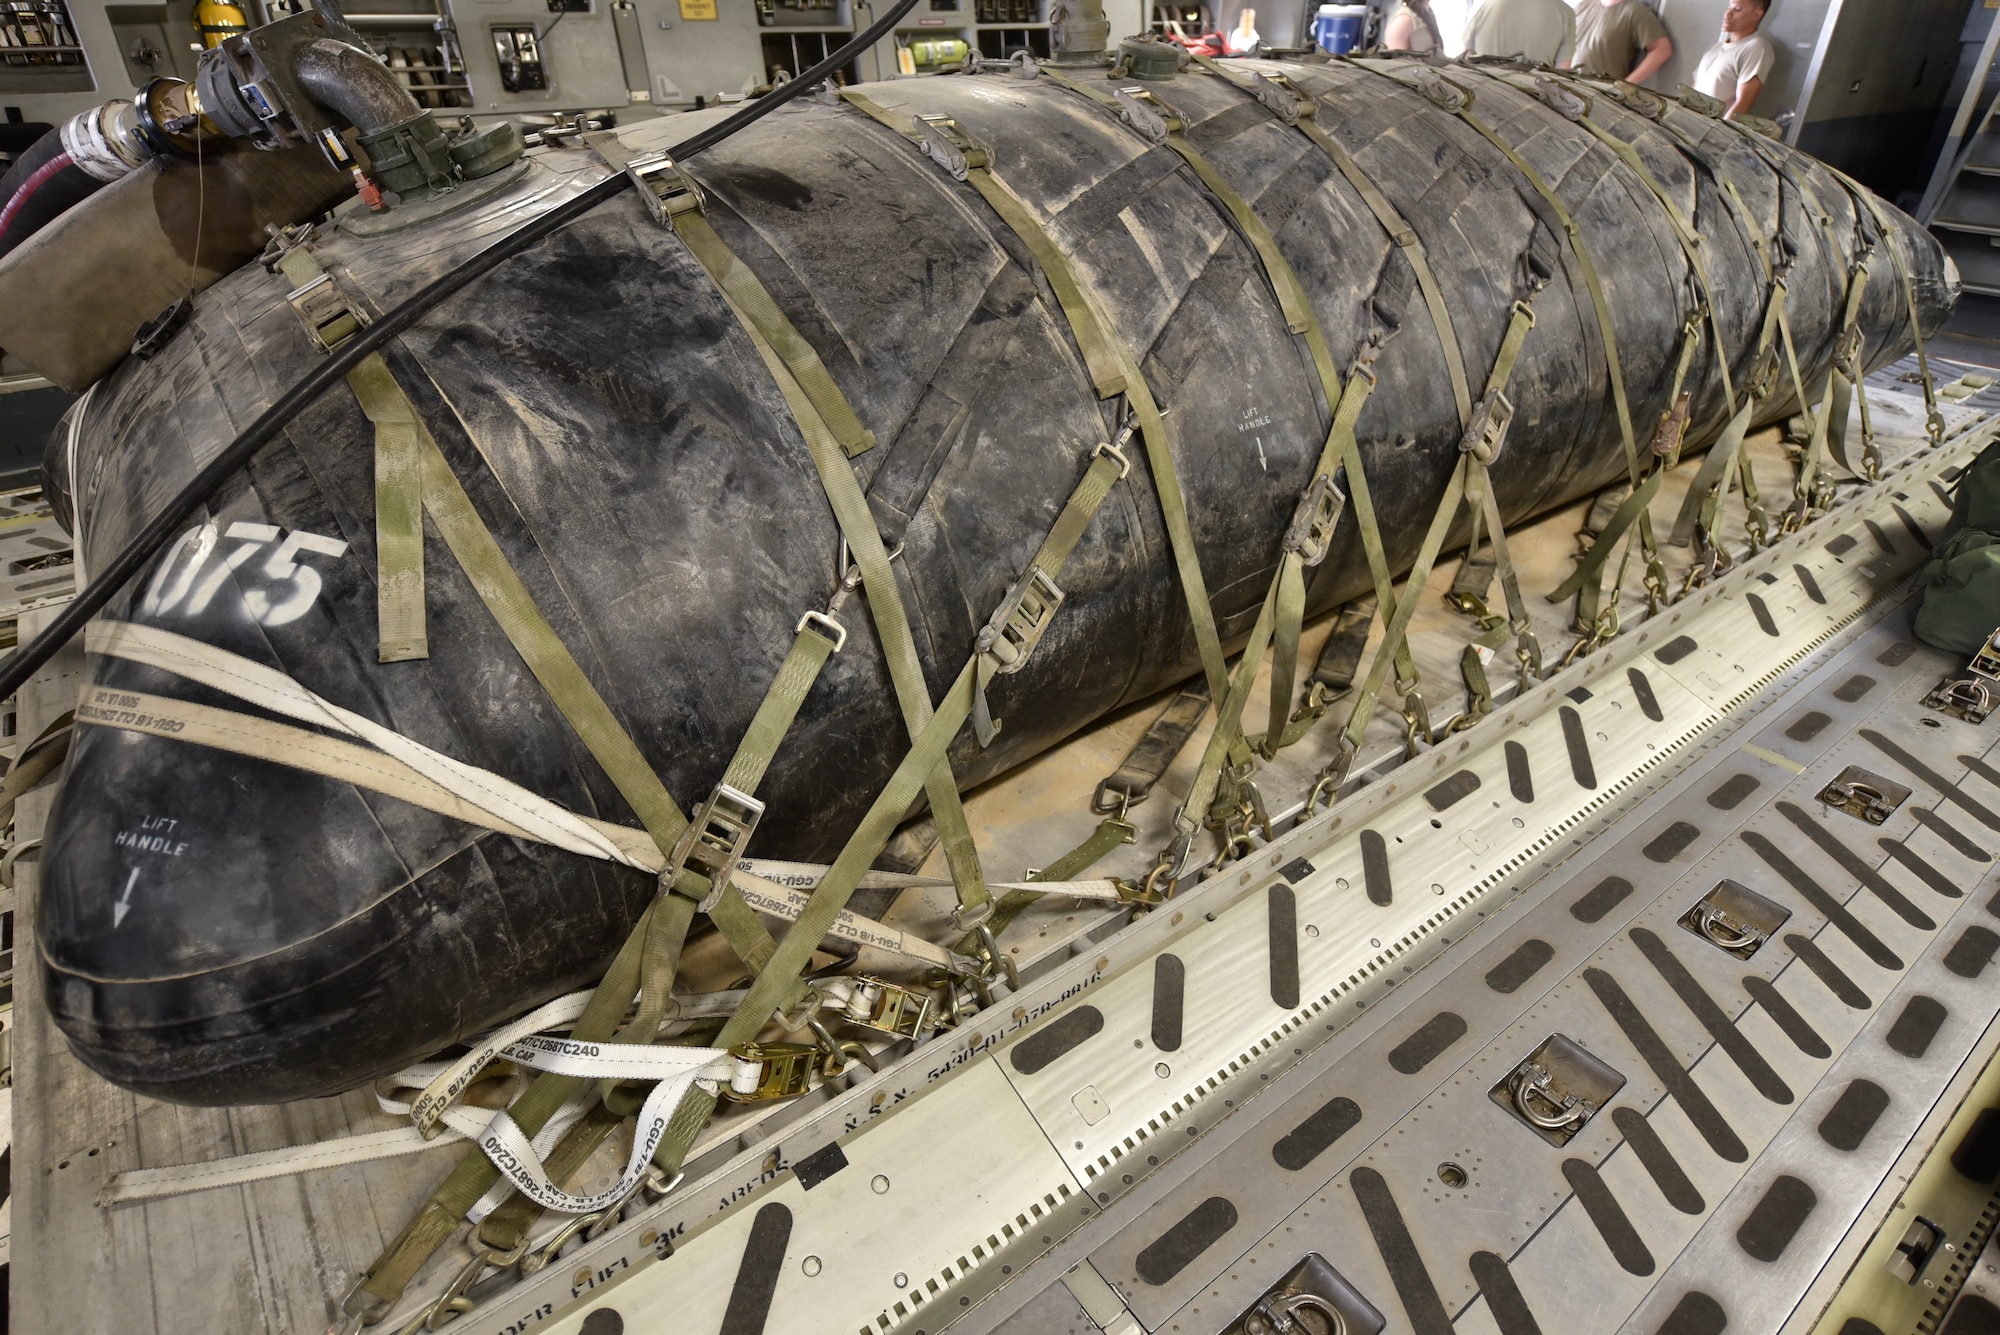 A 2,800 gallon bladder is tightly secured to a pallet prepared for fuel delivery to an undisclosed location in Southwest Asia, May 11, 2018. This delivery is the first of its kind in more than a year and a half. (U.S Air Force photo by Staff Sgt. Enjoli Saunders)